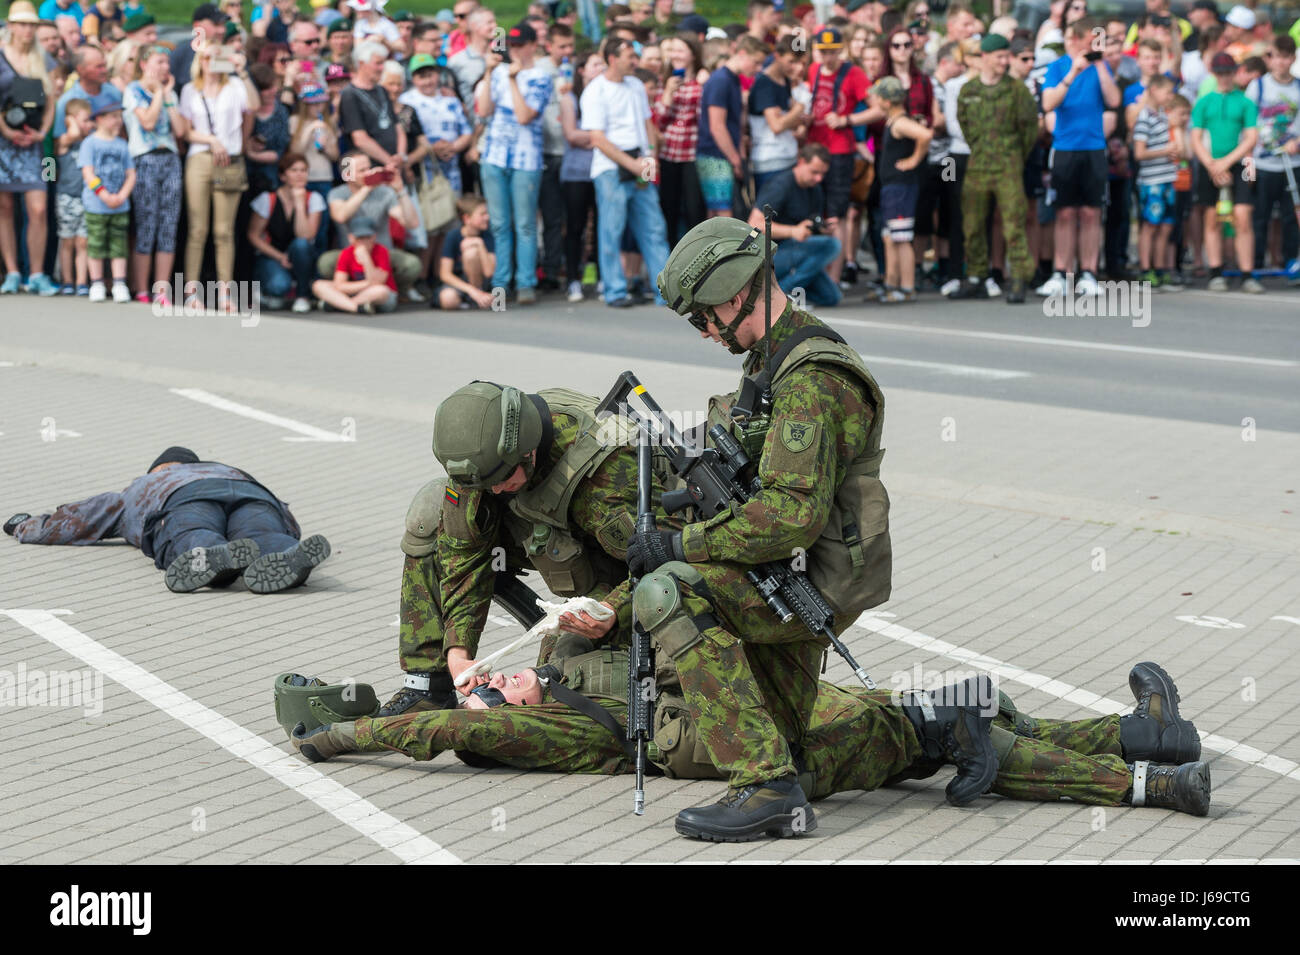 Vilnius, Lithuania. 20th May, 2017. Soldiers show the public how to rescue the wounded in Panevezys, northern city of Lithuania, May 20, 2017. Lithuania celebrated Armed Forces and Public Unity Day in northern city of Panevezys on Saturday. Credit: Alfredas Pliadis/Xinhua/Alamy Live News Stock Photo